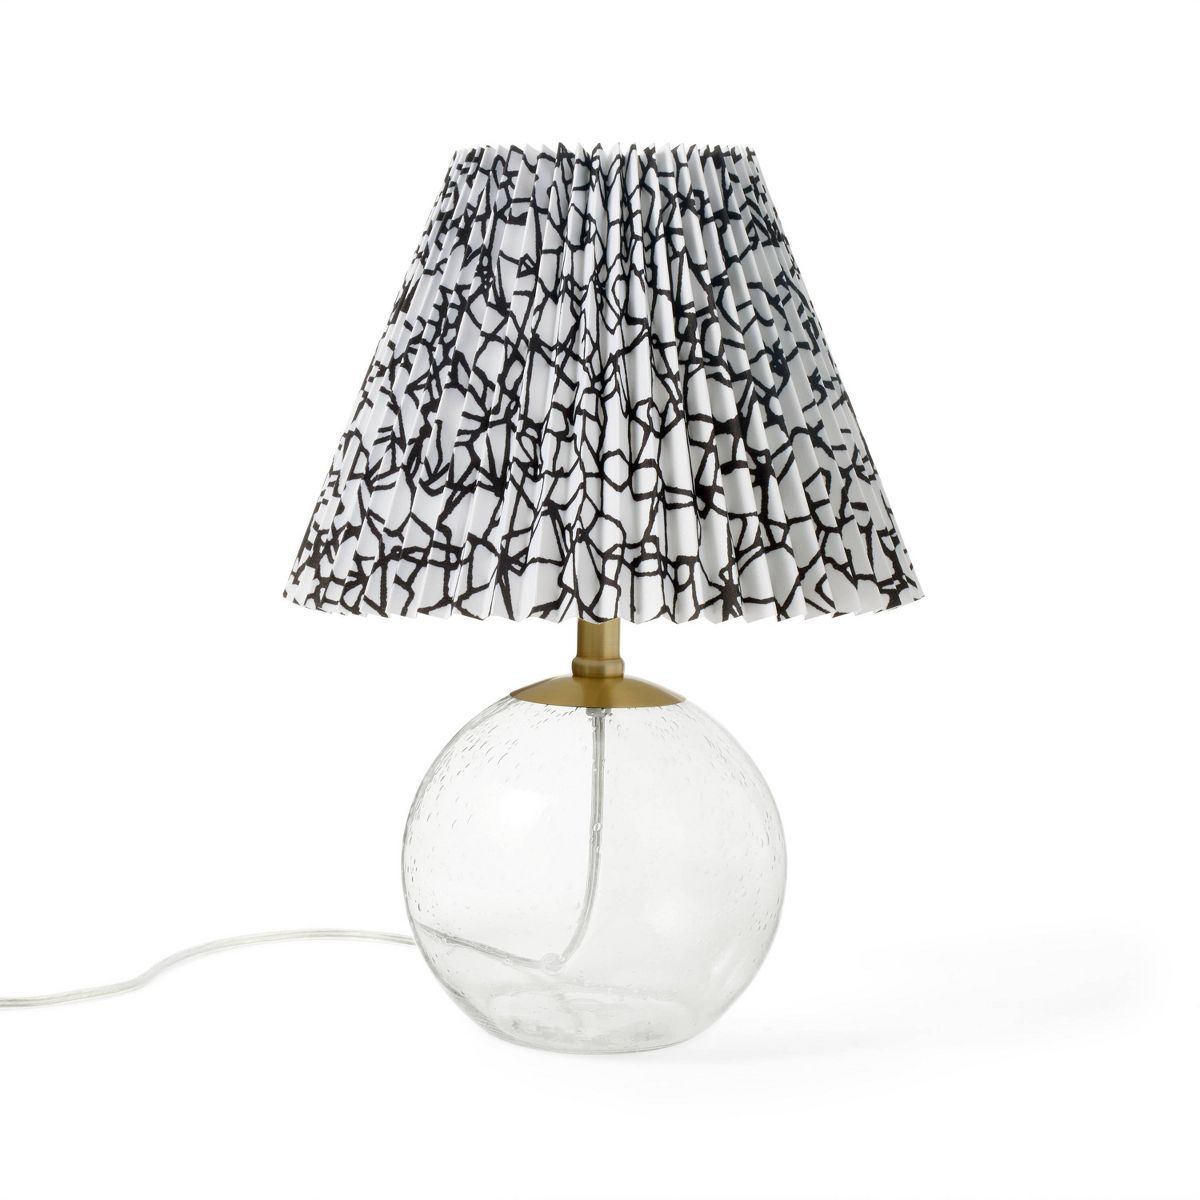 Cracked Glass Black/White Shade Round Accent Table Lamp - DVF for Target | Target